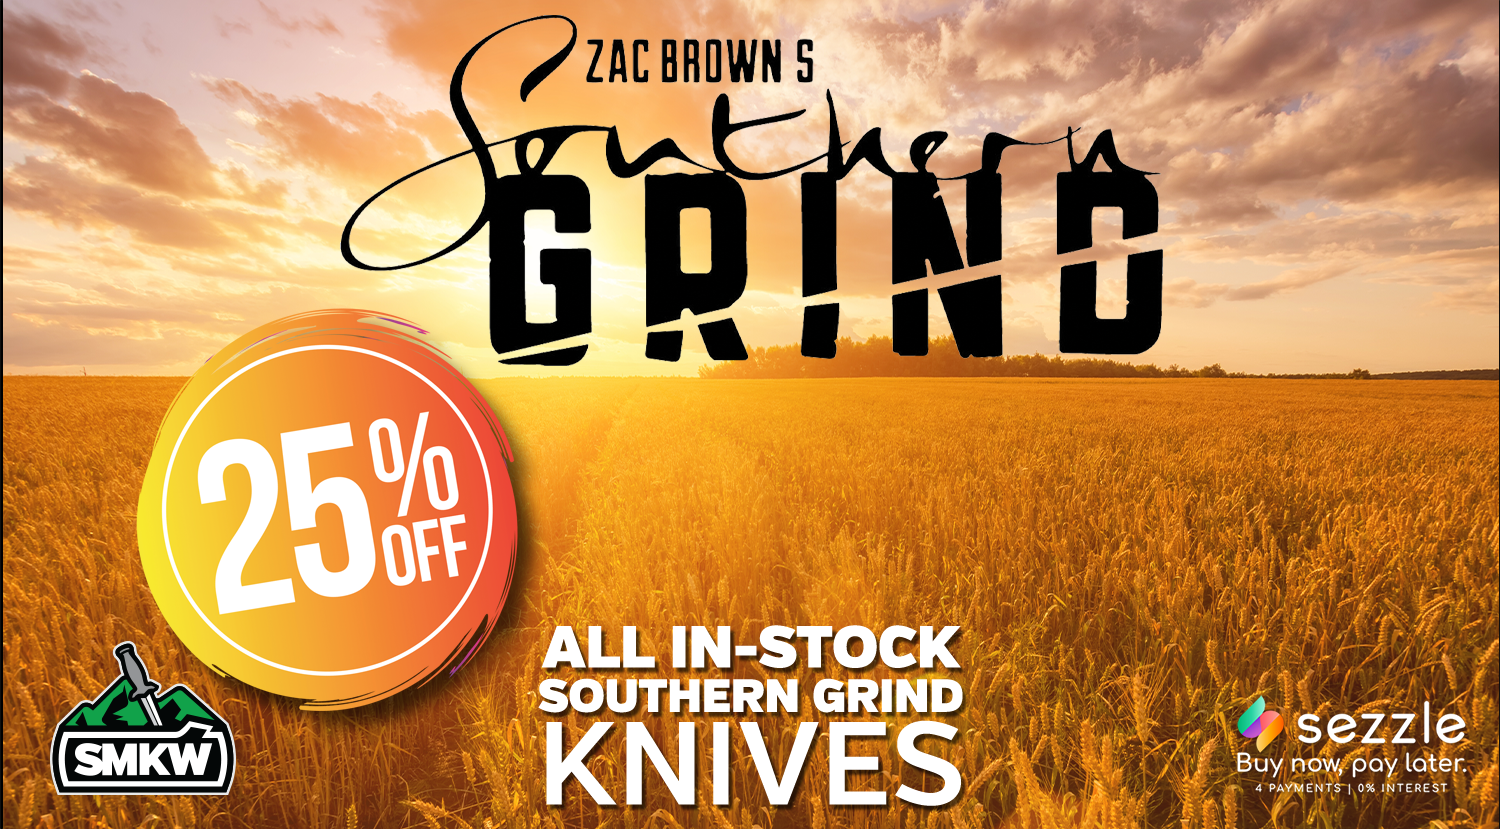 25% Off in-stock Southern Grind Knives